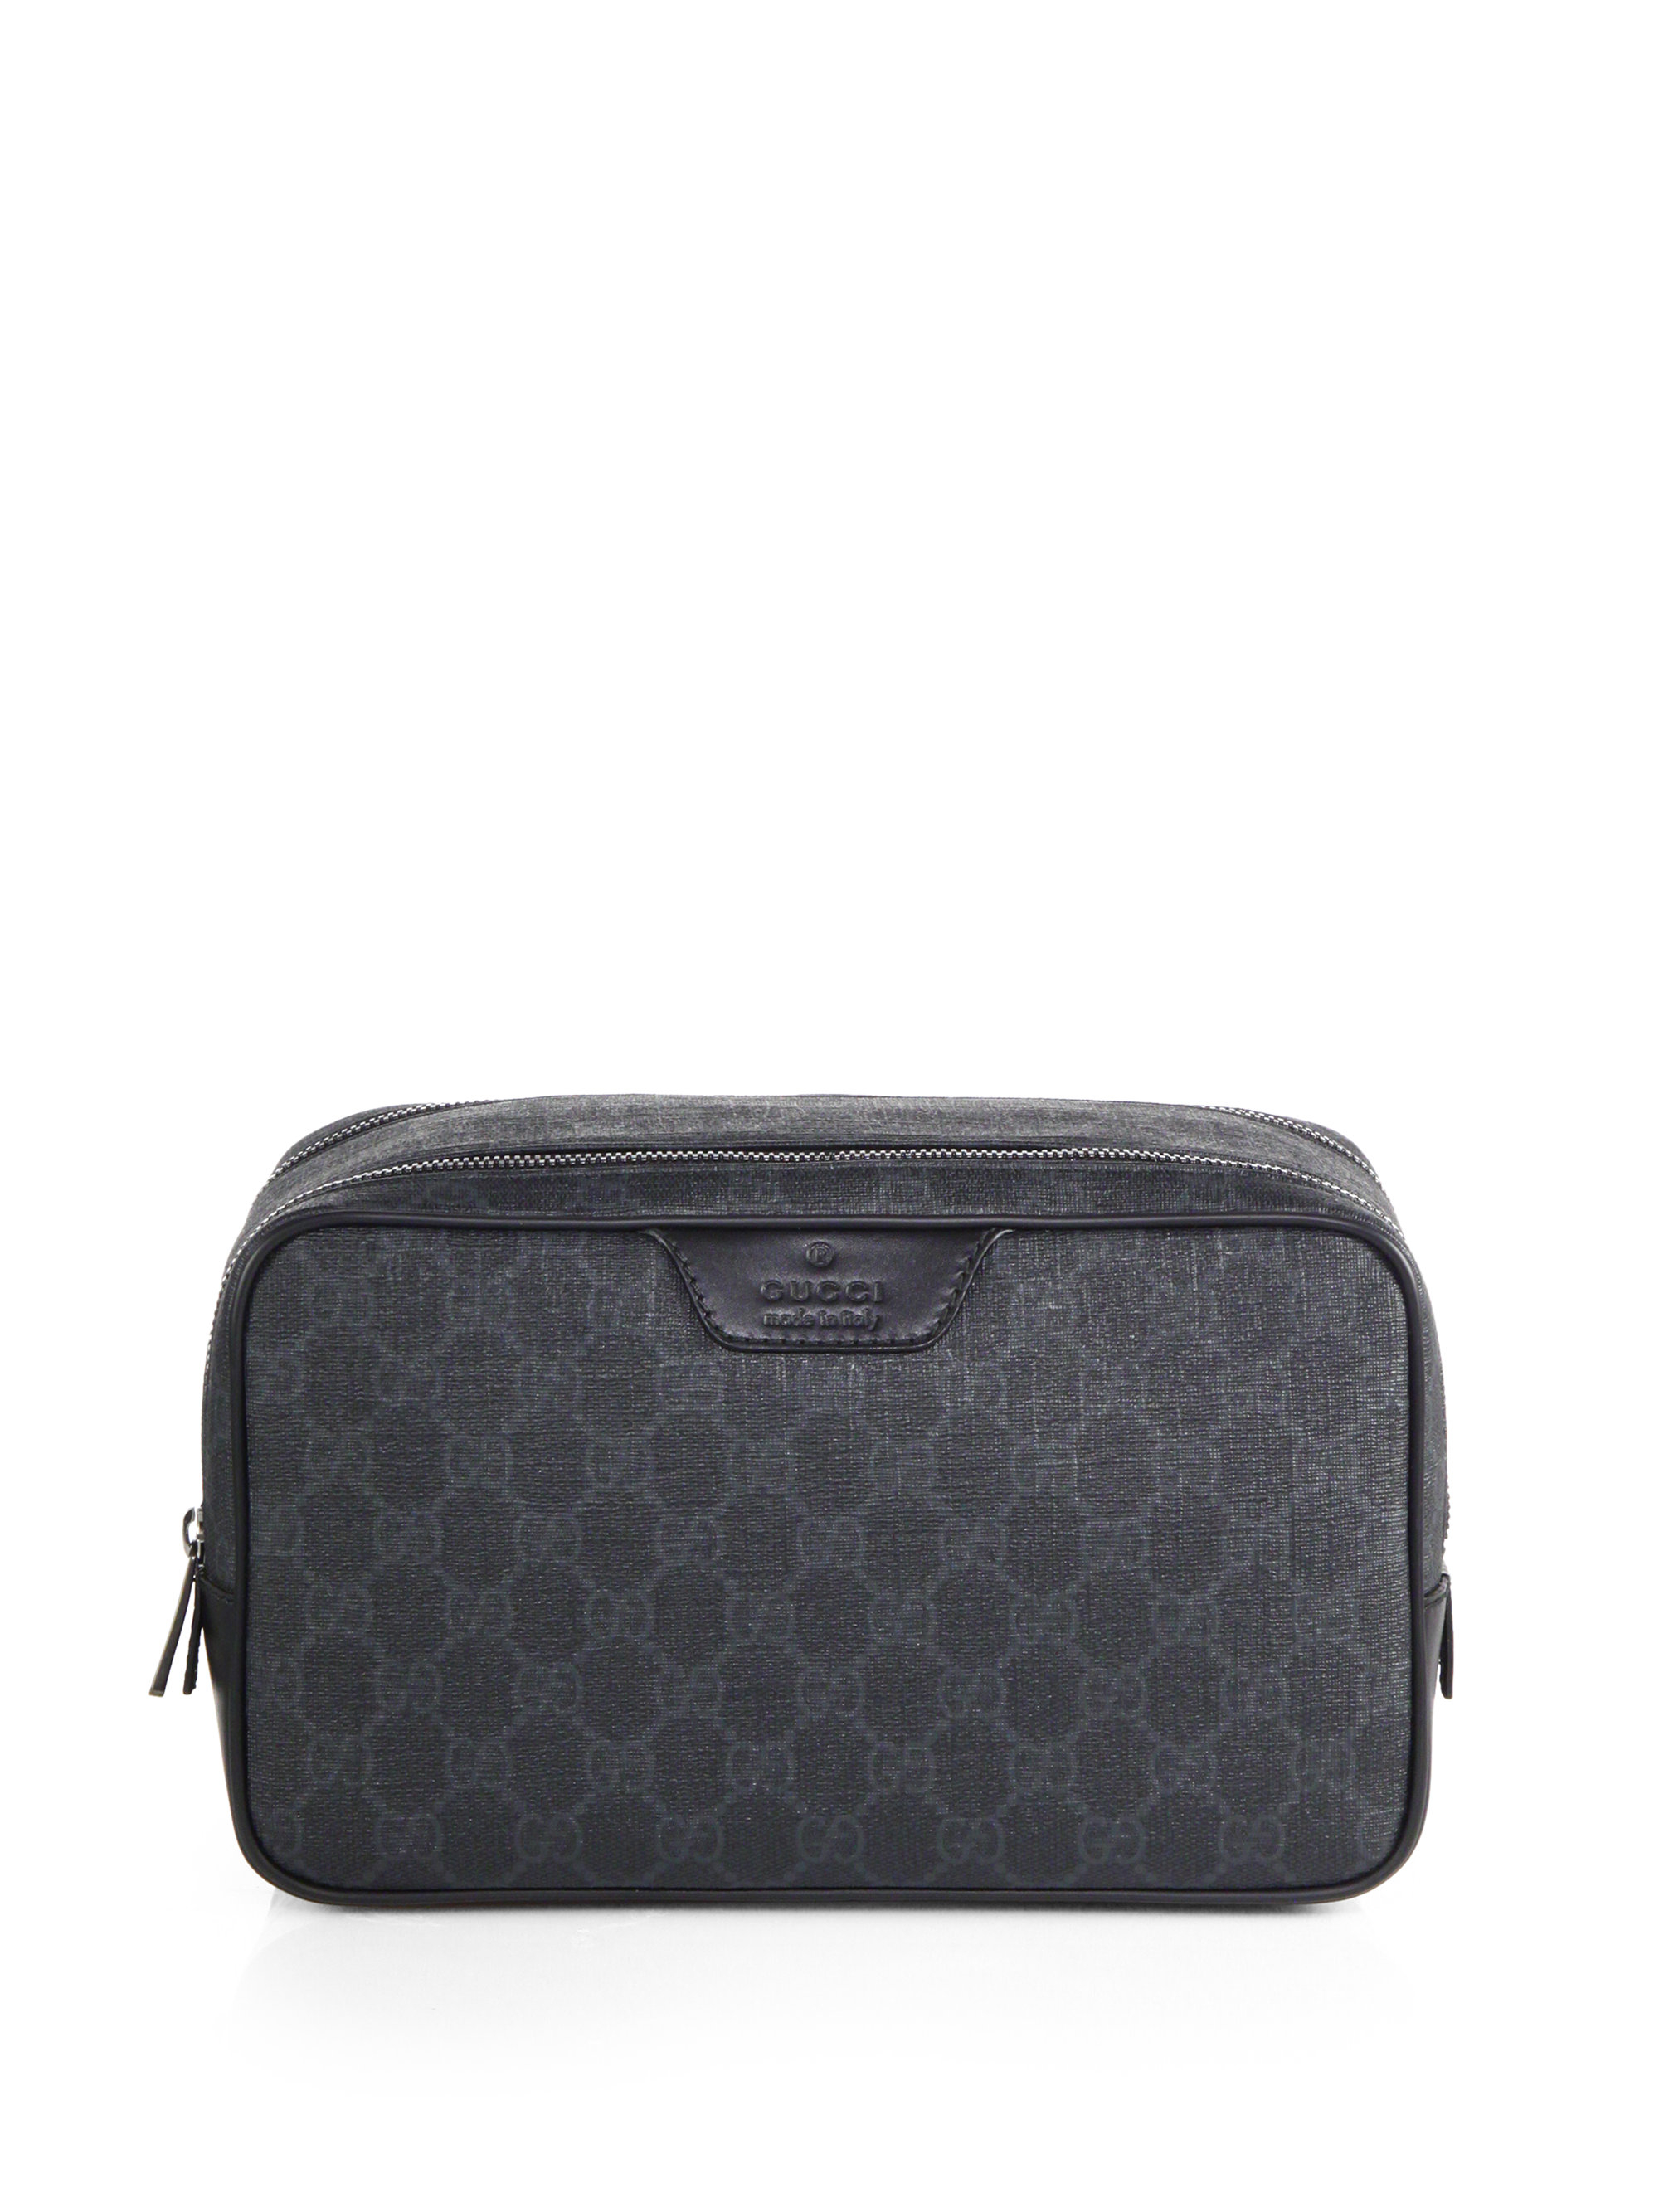 gucci toiletry bag mens, OFF 78%,www 